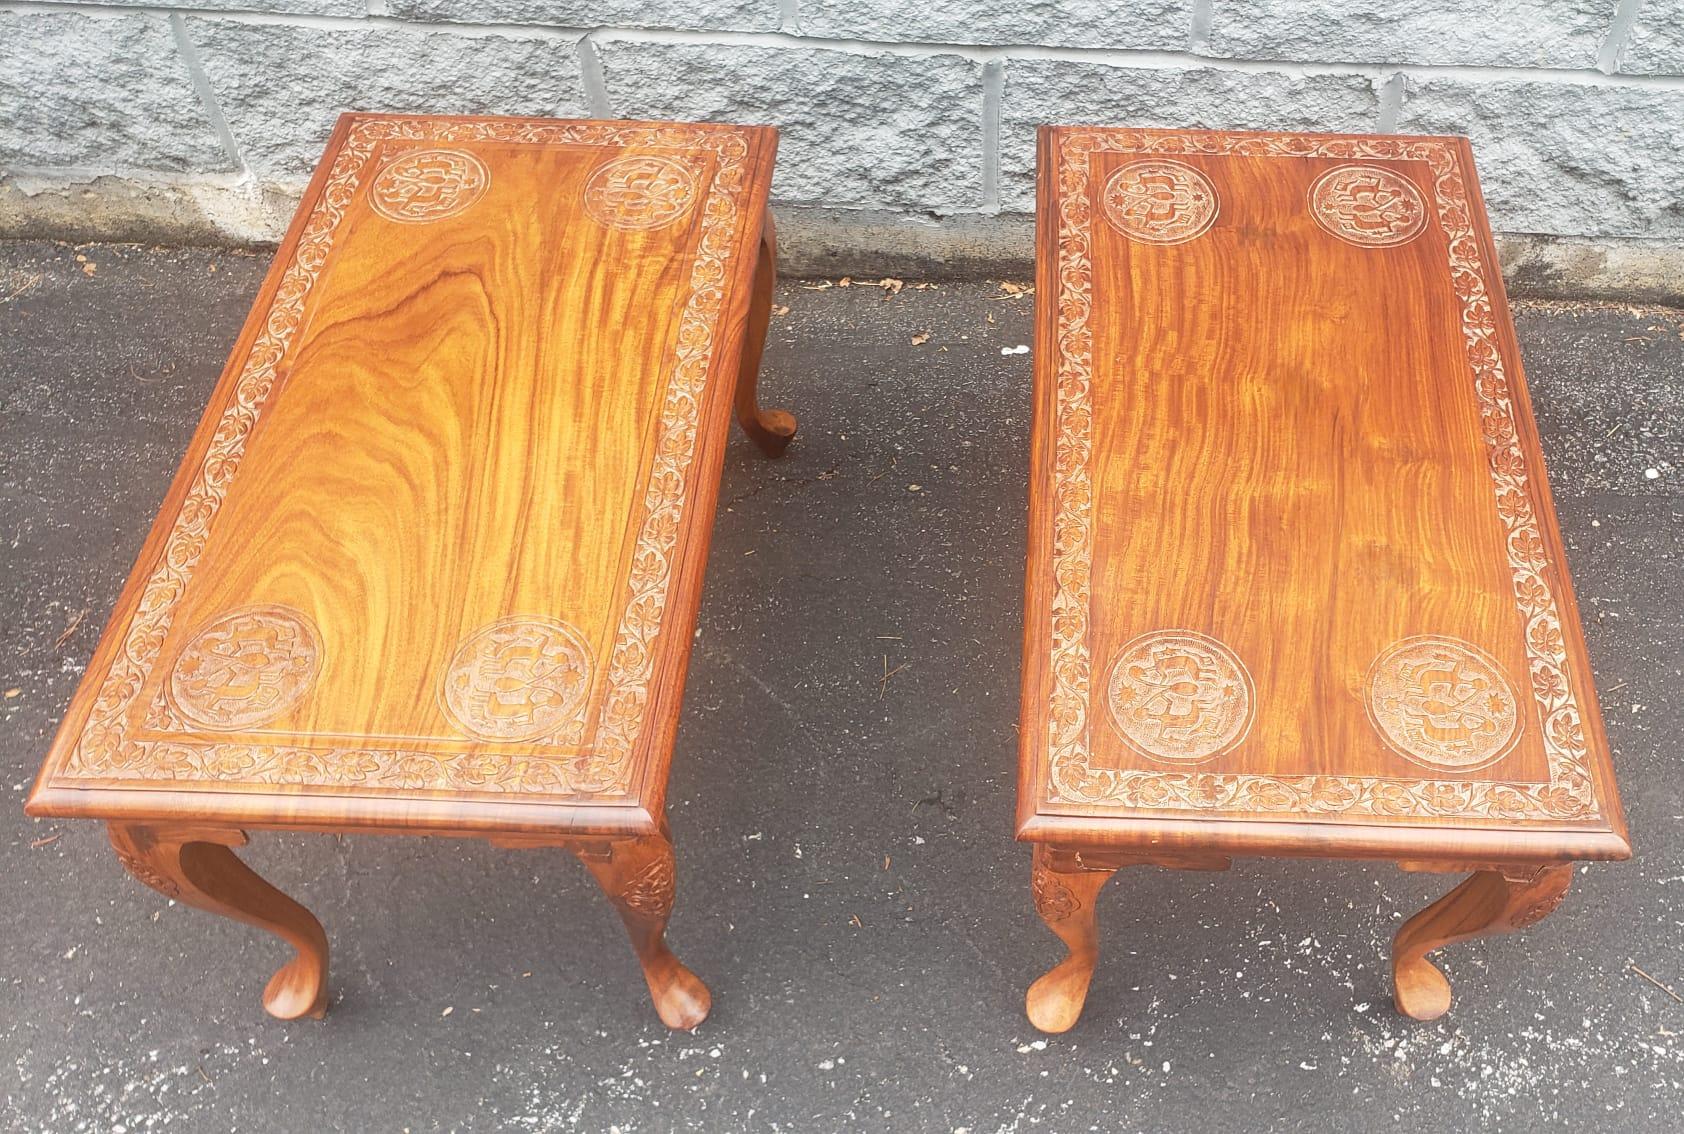 Midcentury Anglo-Japanese Carved Hardwood Low Side Tables, a Pair In Good Condition For Sale In Germantown, MD